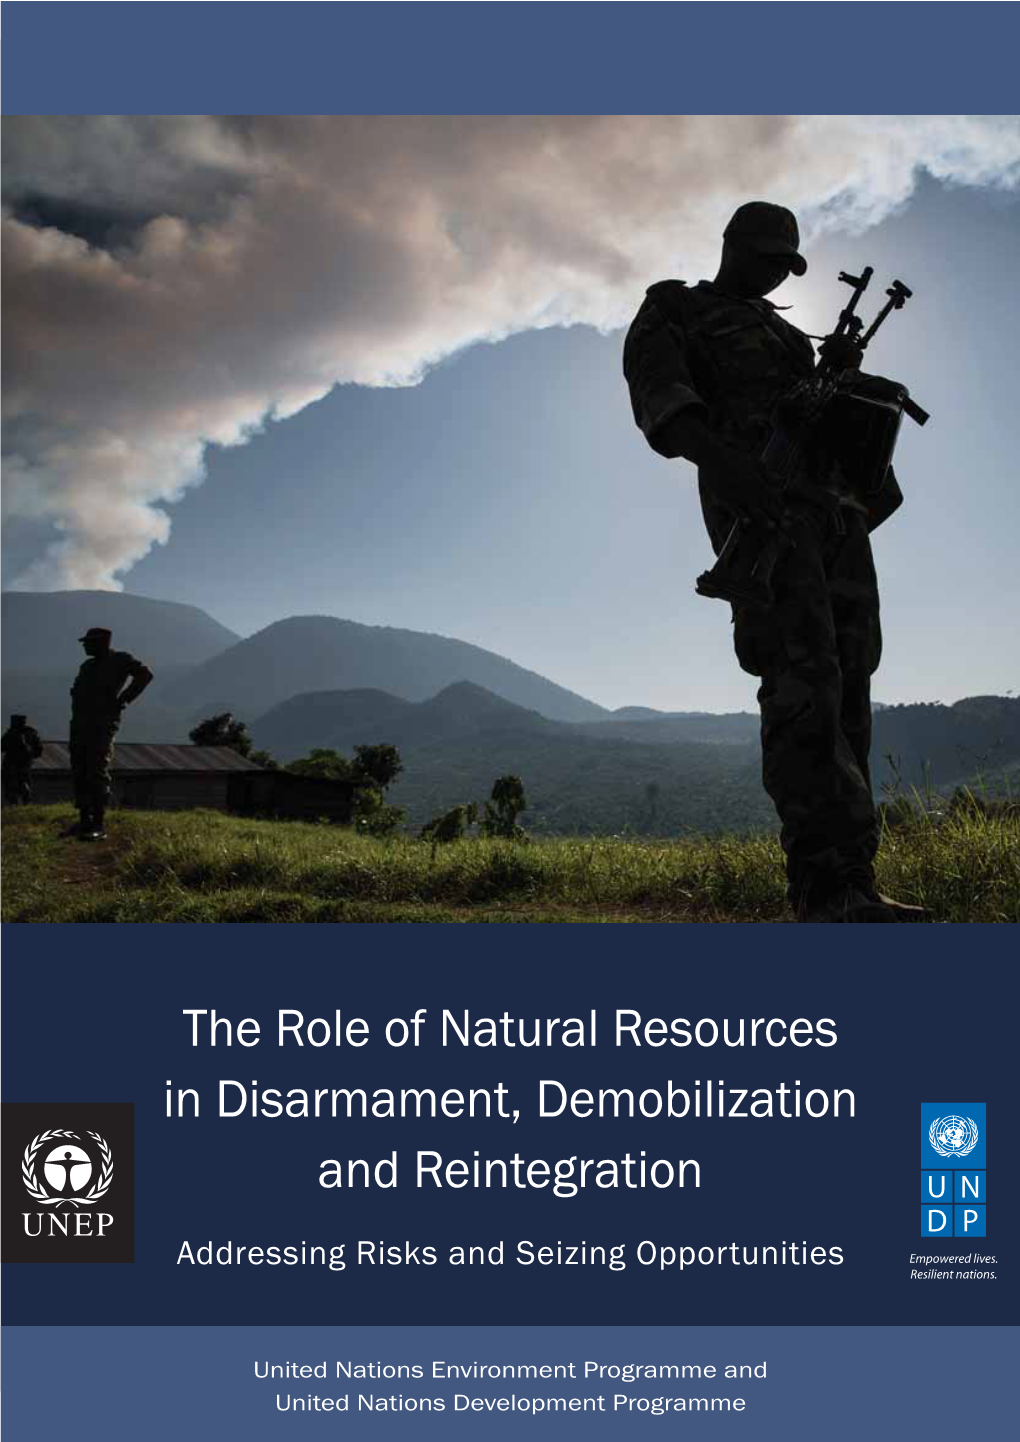 The Role of Natural Resources in Disarmament, Demobilization and Reintegration